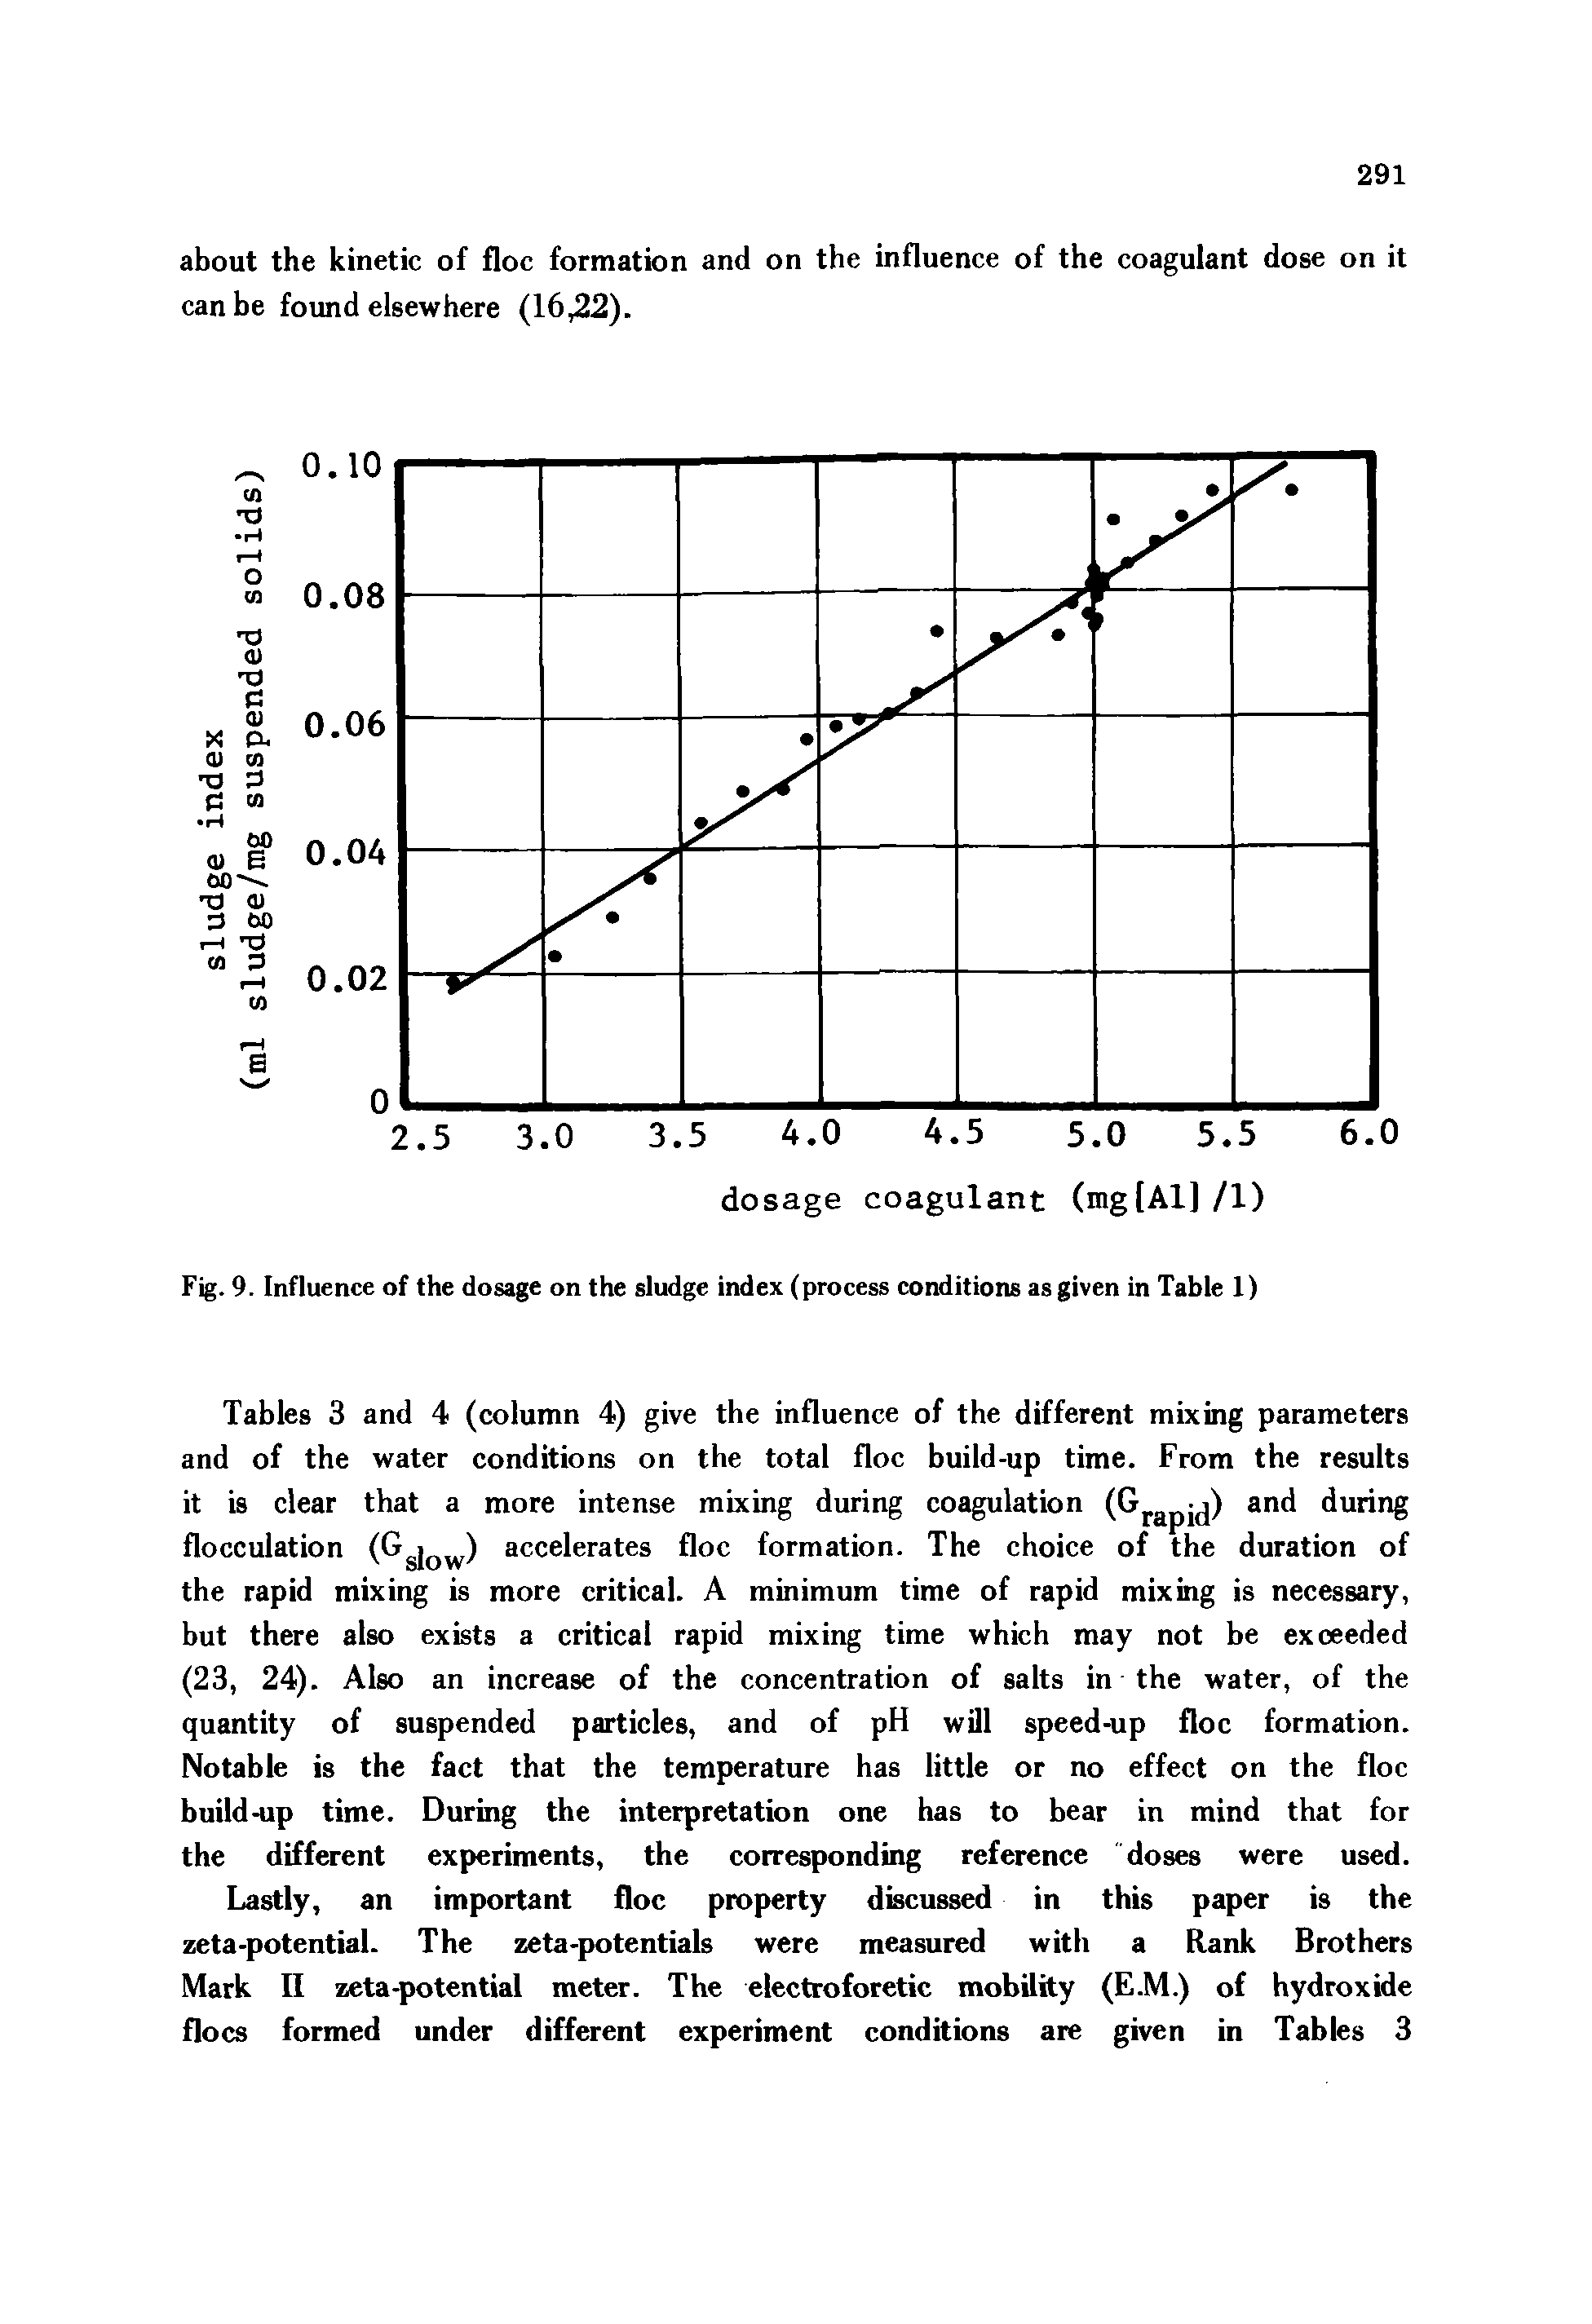 Tables 3 and 4 (column 4) give the influence of the different mixing parameters and of the water conditions on the total floe build-up time. From the results it is clear that a more intense mixing during coagulation (Gpapy) and during flocculation accelerates floe formation. The choice of the duration of...